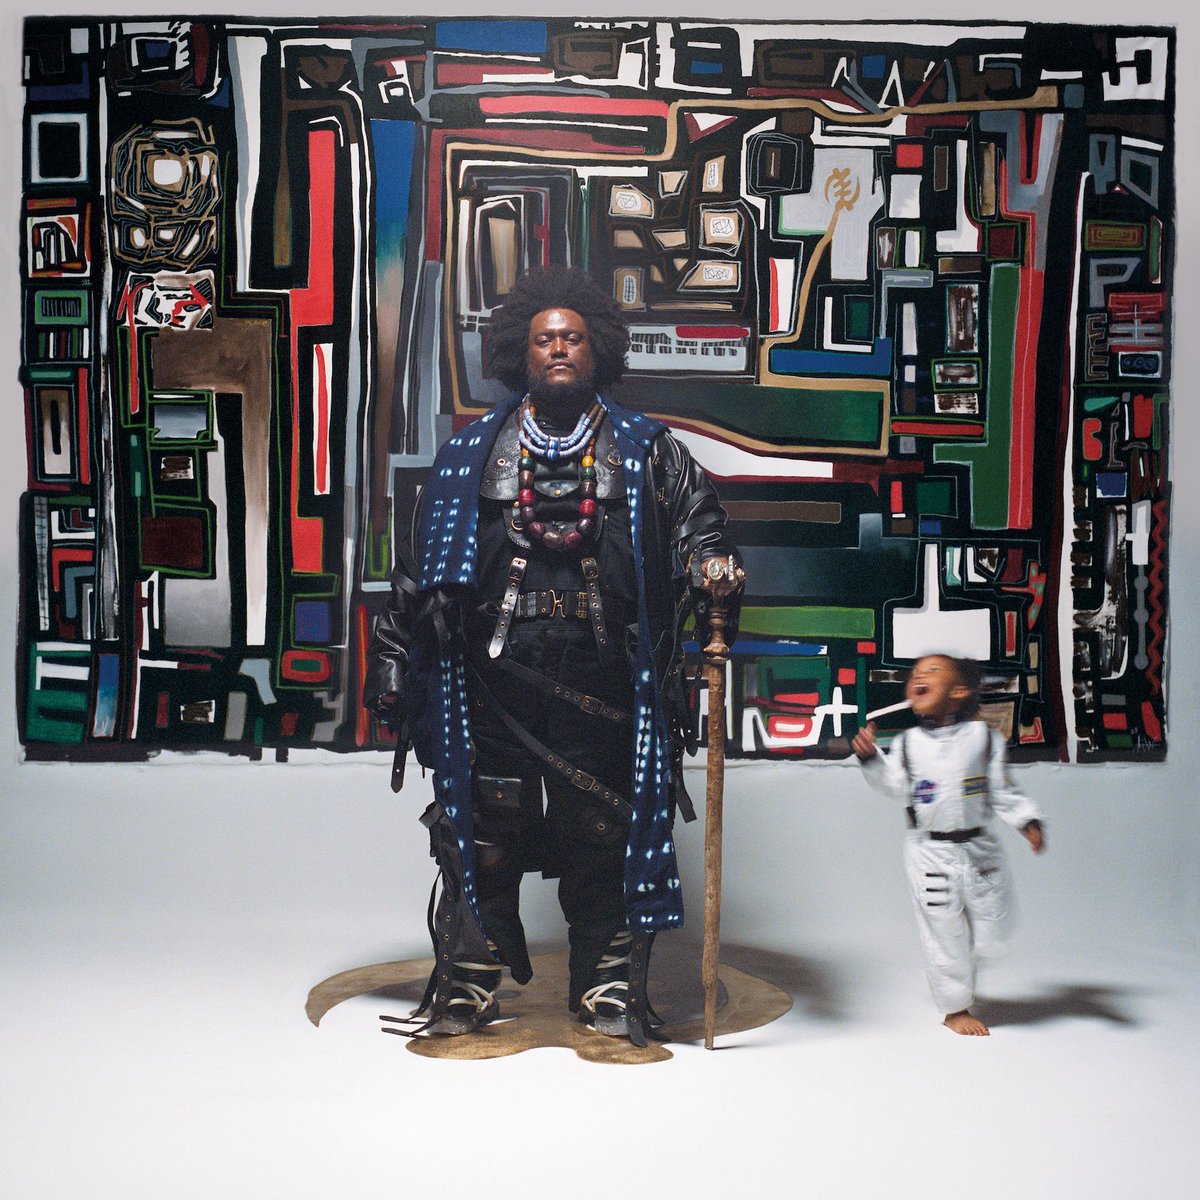 Kamasi Washington's remarkable new album is here, and it features André 3000, Thundercat, George Clinton & more. Our review: brooklynvegan.com/jessica-pratt-…